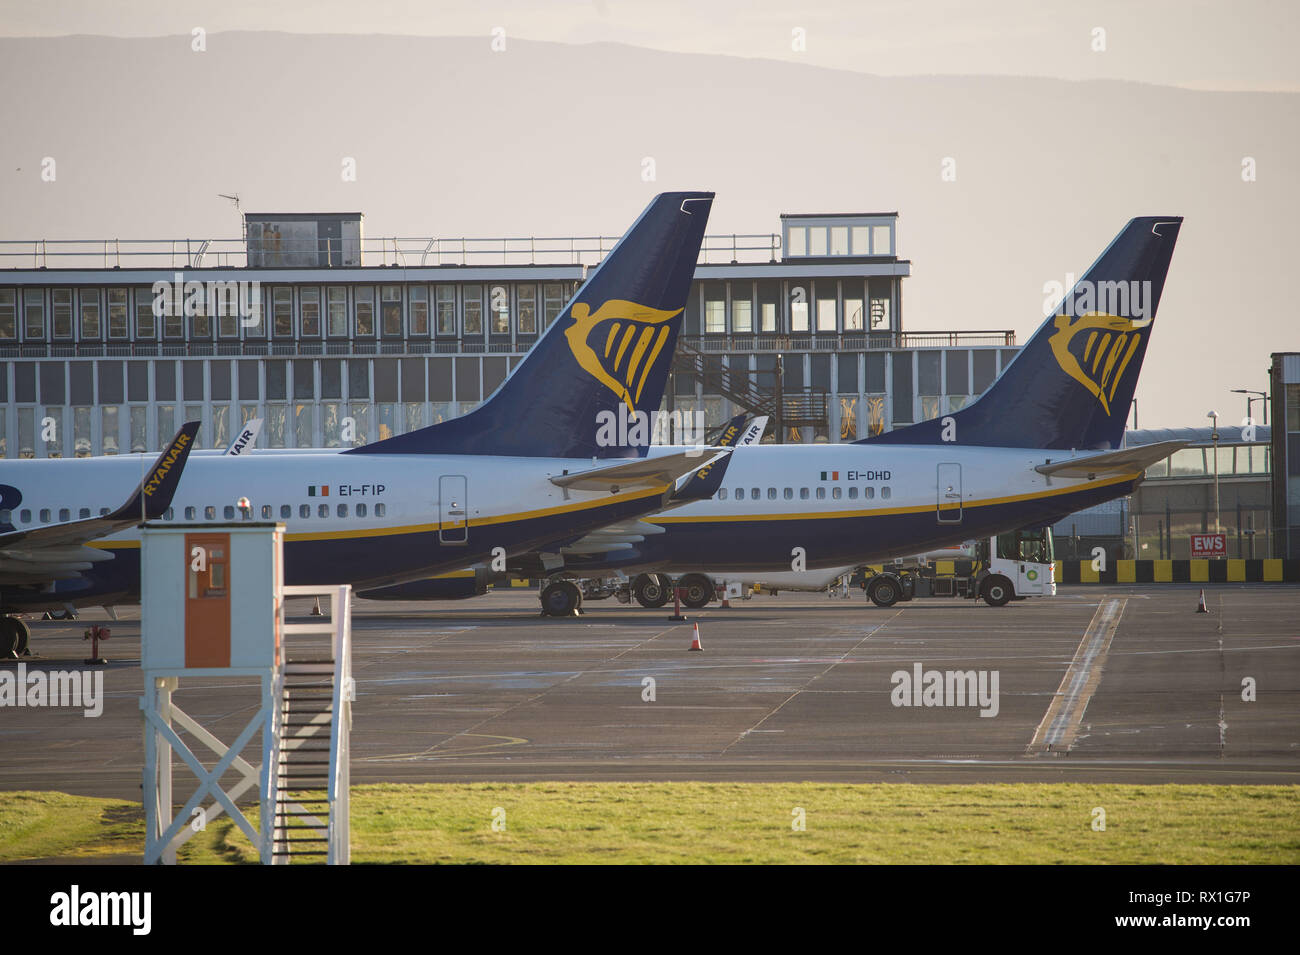 Prestwick, UK. 7 March 2019. Ryanair planes seen at Prestwick on a Spring evening.  Ryanair is an Irish low-cost airline founded in 1984, headquartere Stock Photo